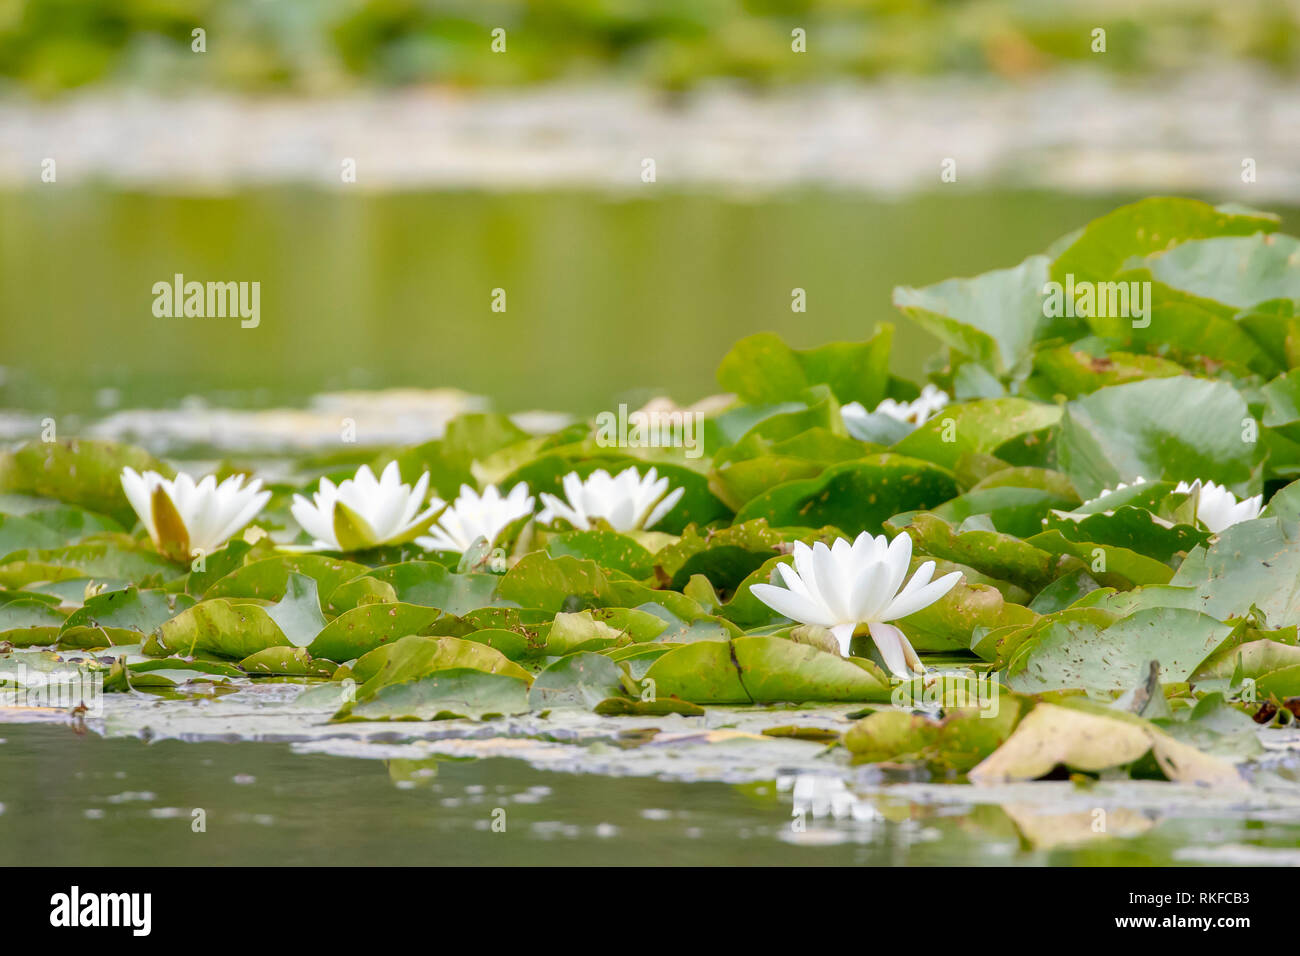 European white water lily, Nymphaea alba in full bloom a lake, England Stock Photo